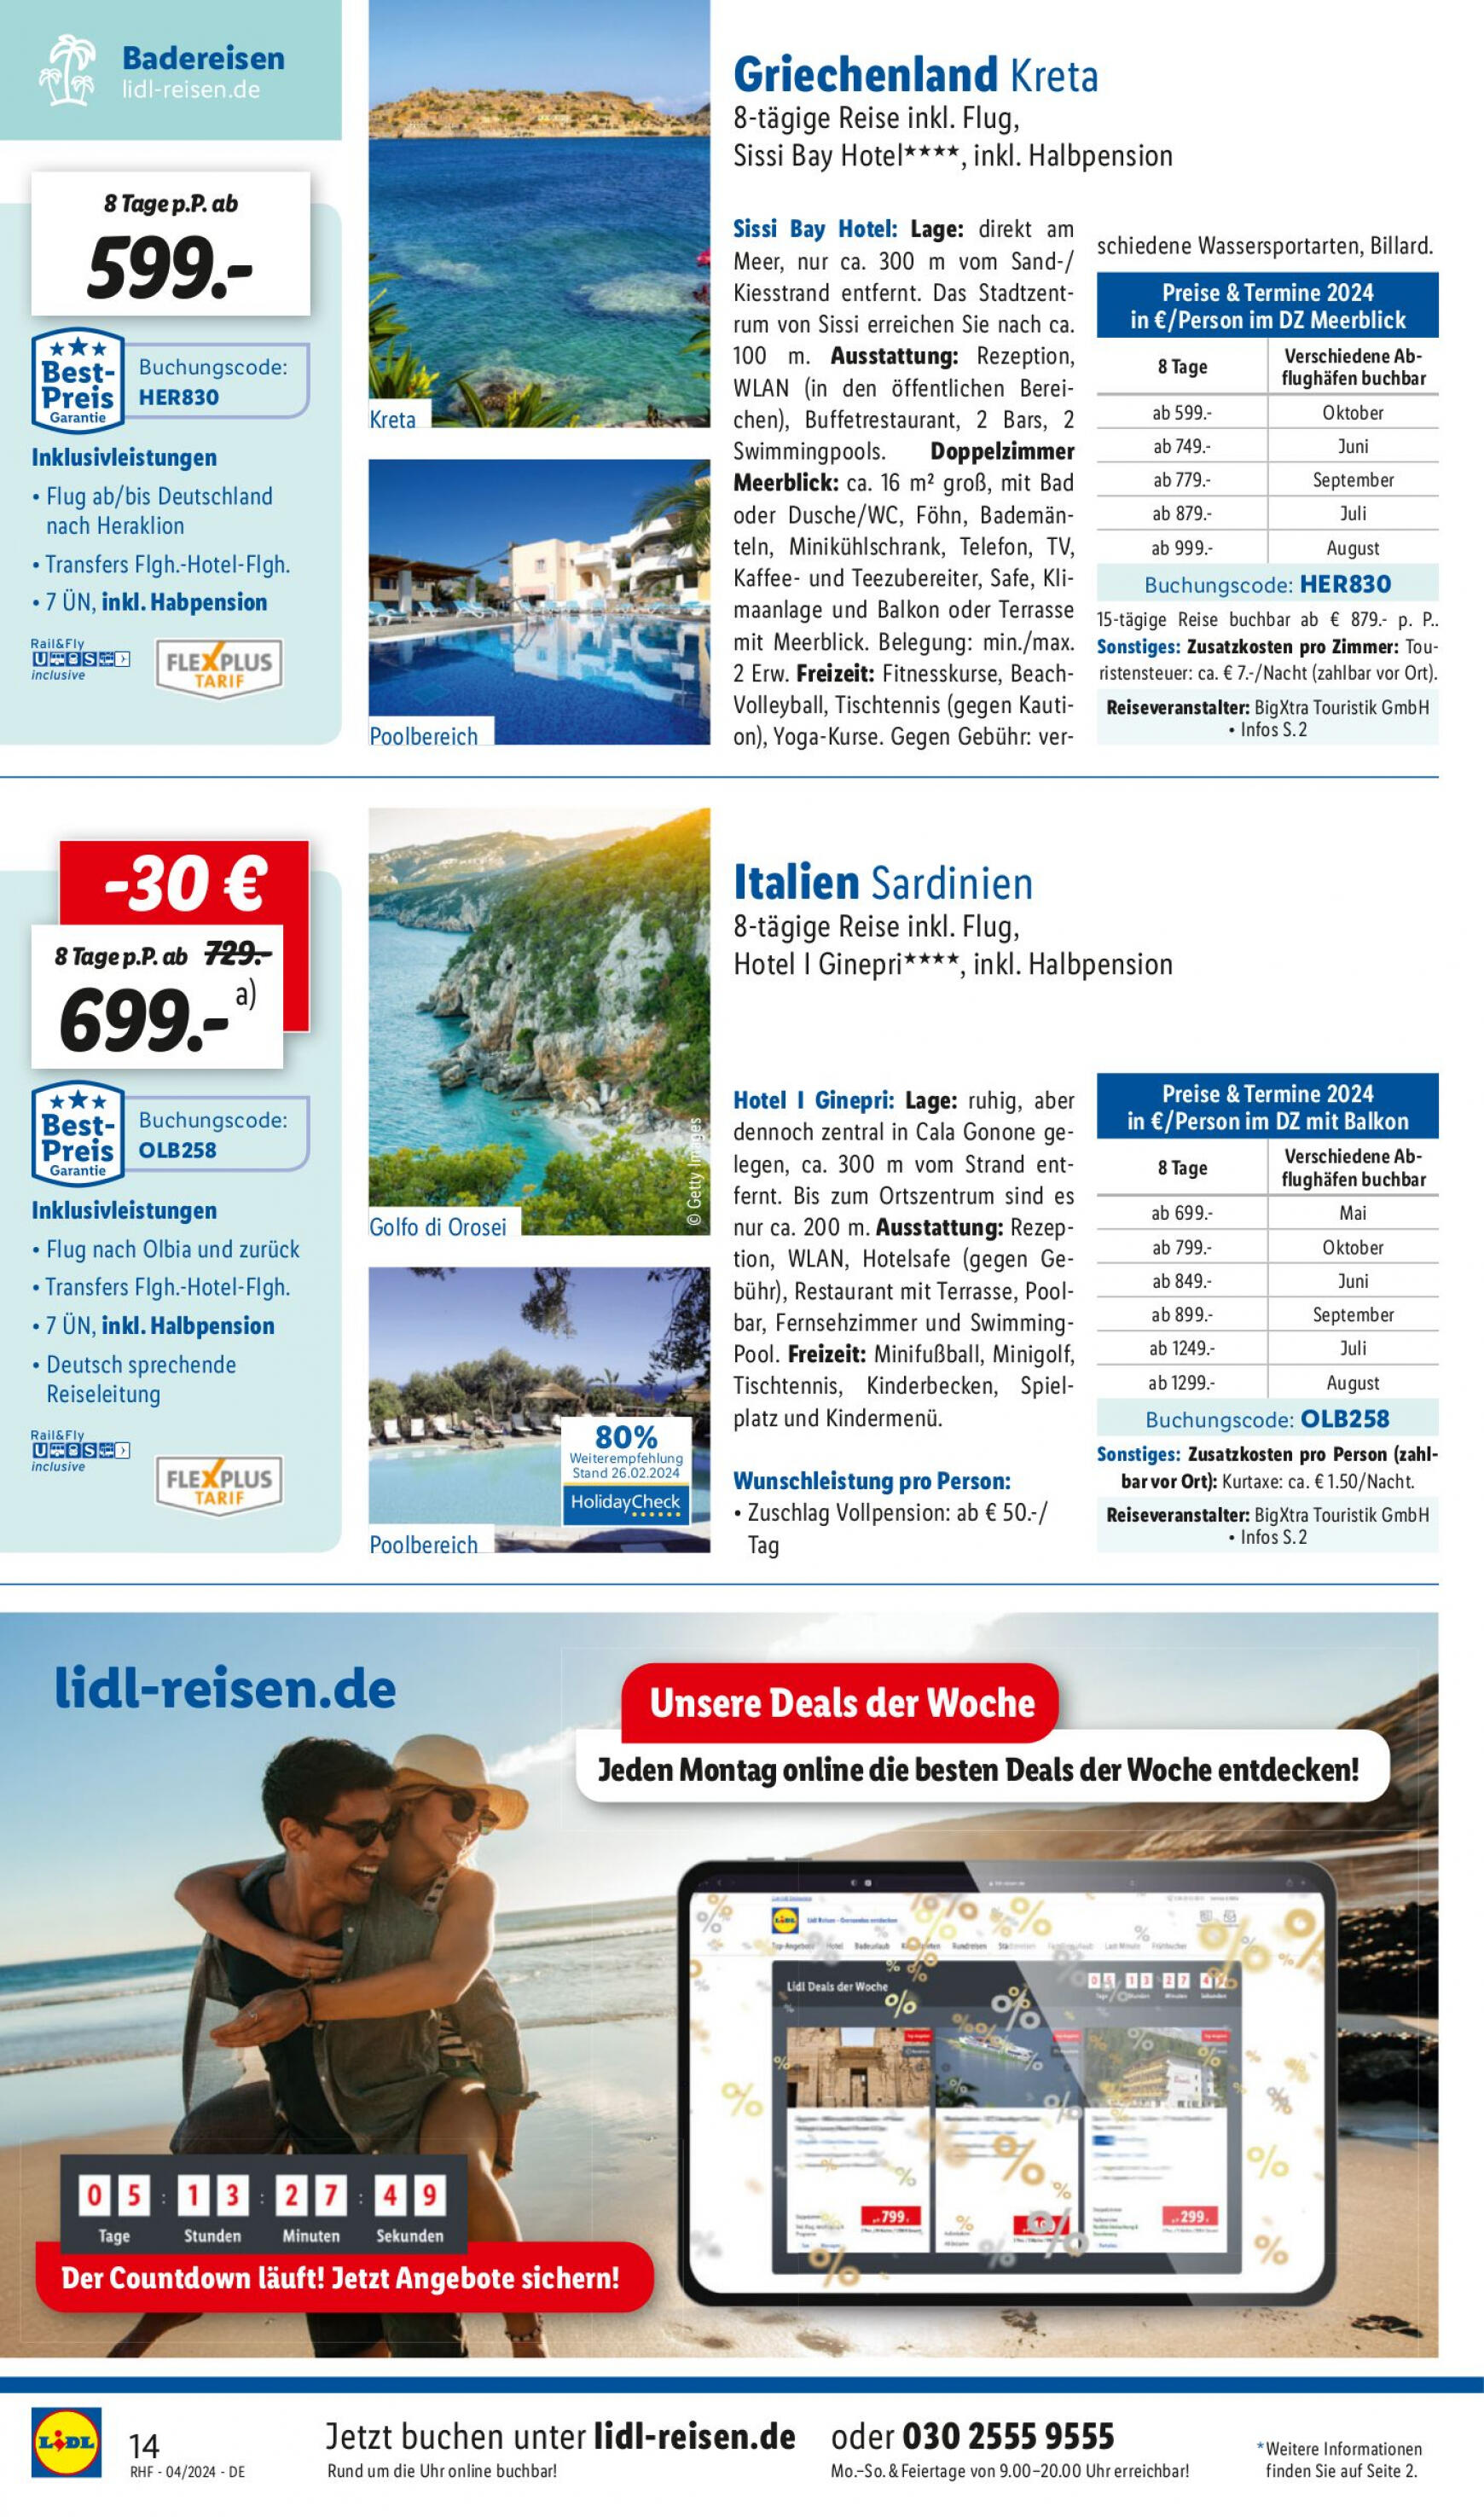 lidl - Flyer Lidl - April Reise-Highlights aktuell 27.03. - 30.04. - page: 14